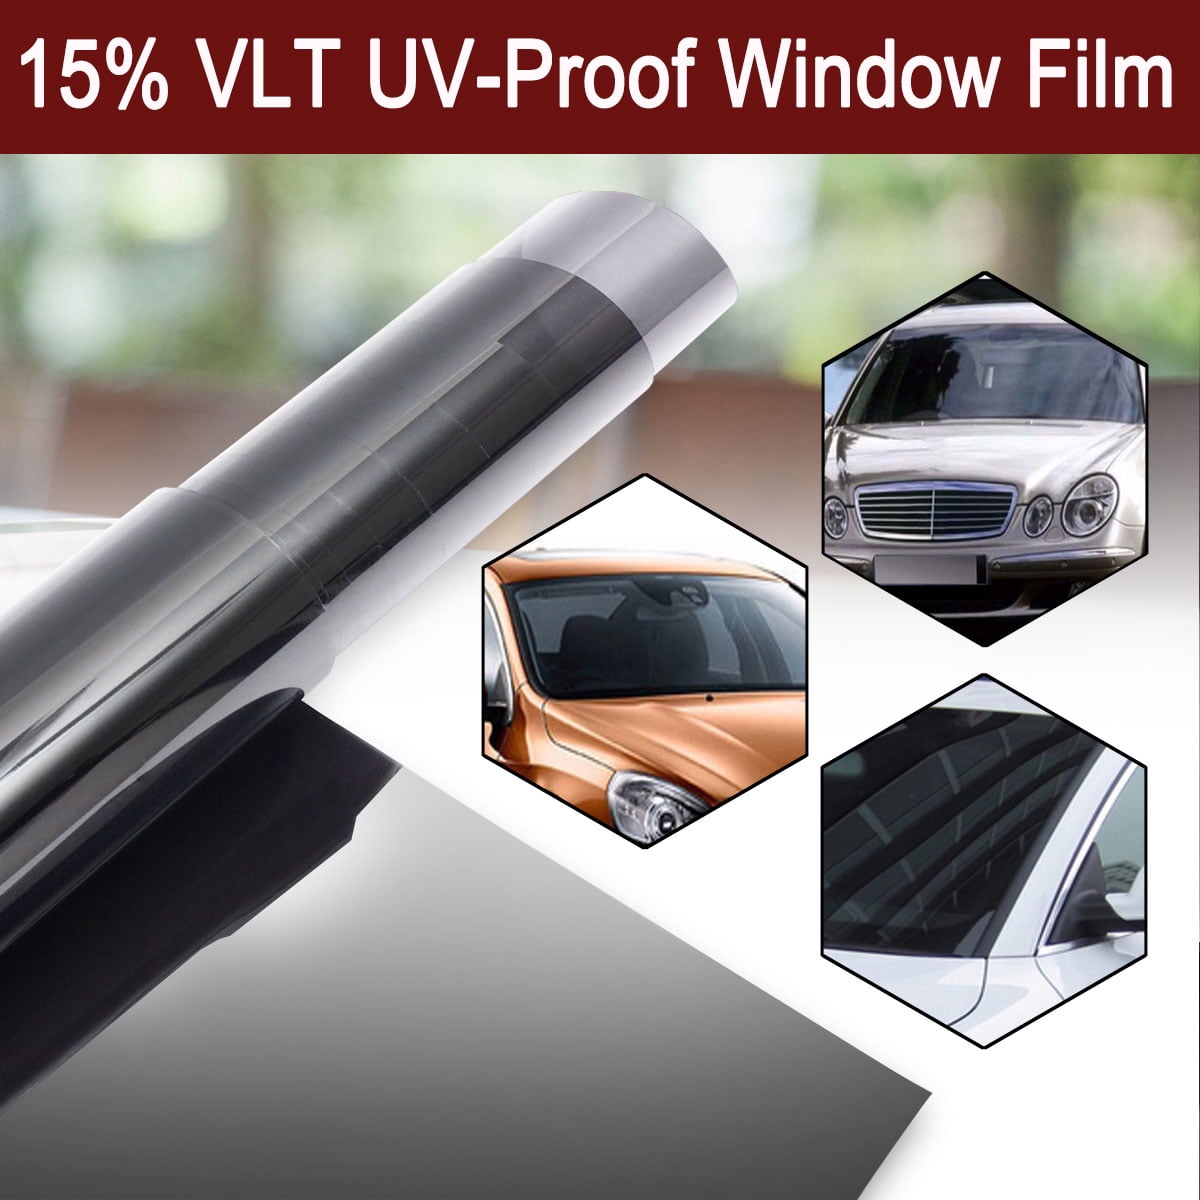 Norld 35% 20 in x 25 Ft DIY Professional Adhesive Window Tint Film Uncut Roll